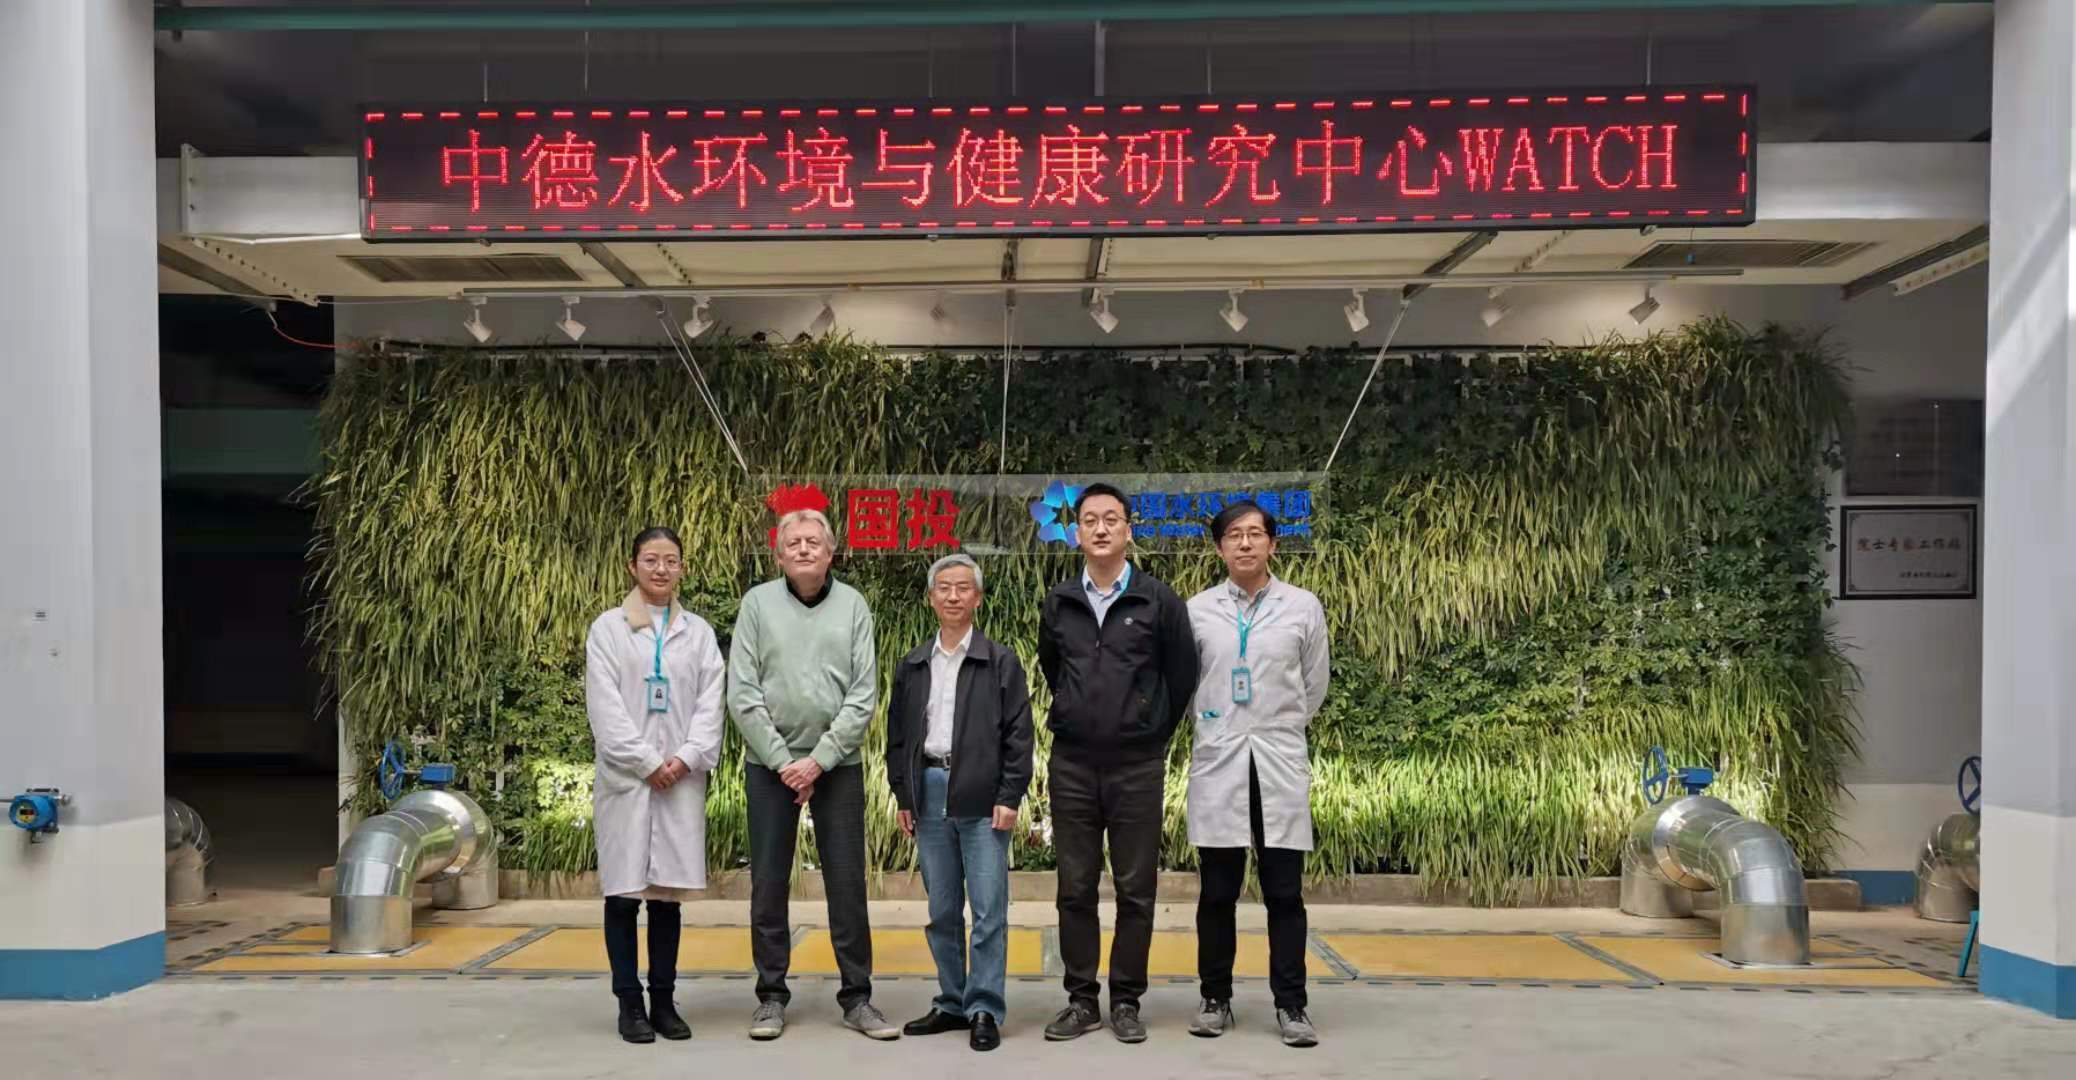 Visiting of the joint laboratory of WATCH in Beijing